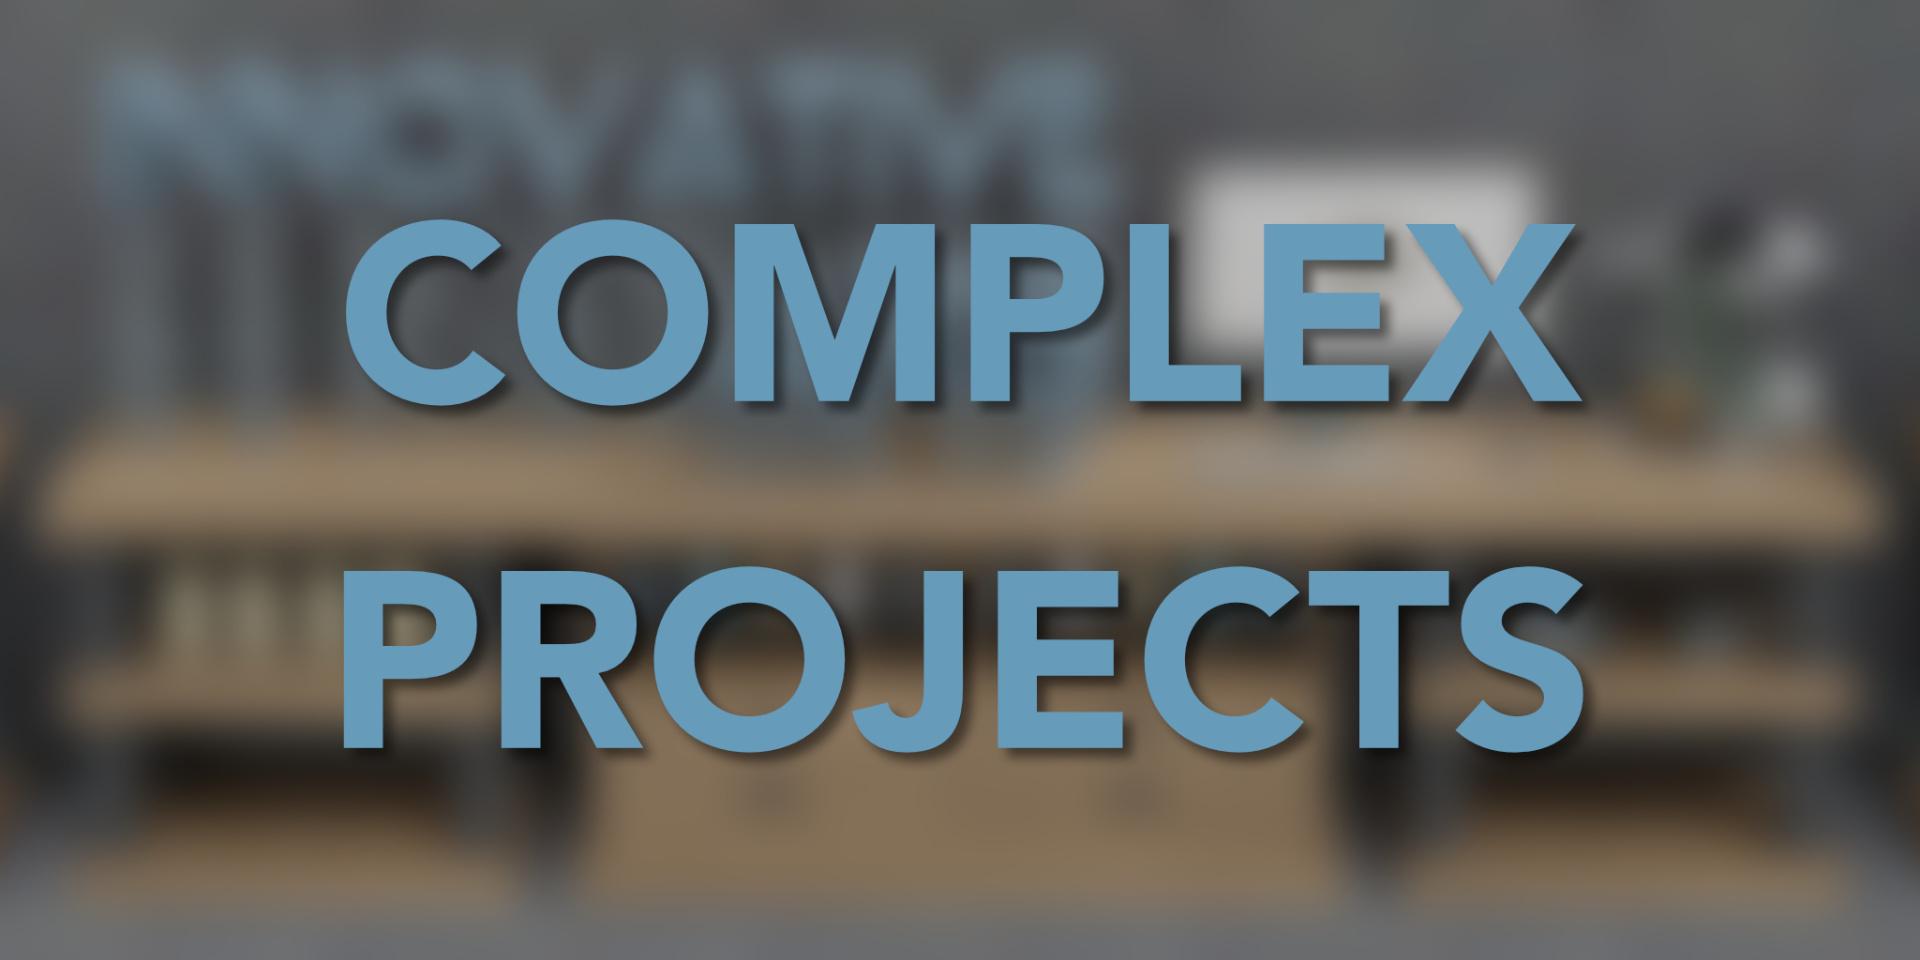 COMPLEX PROJECTS